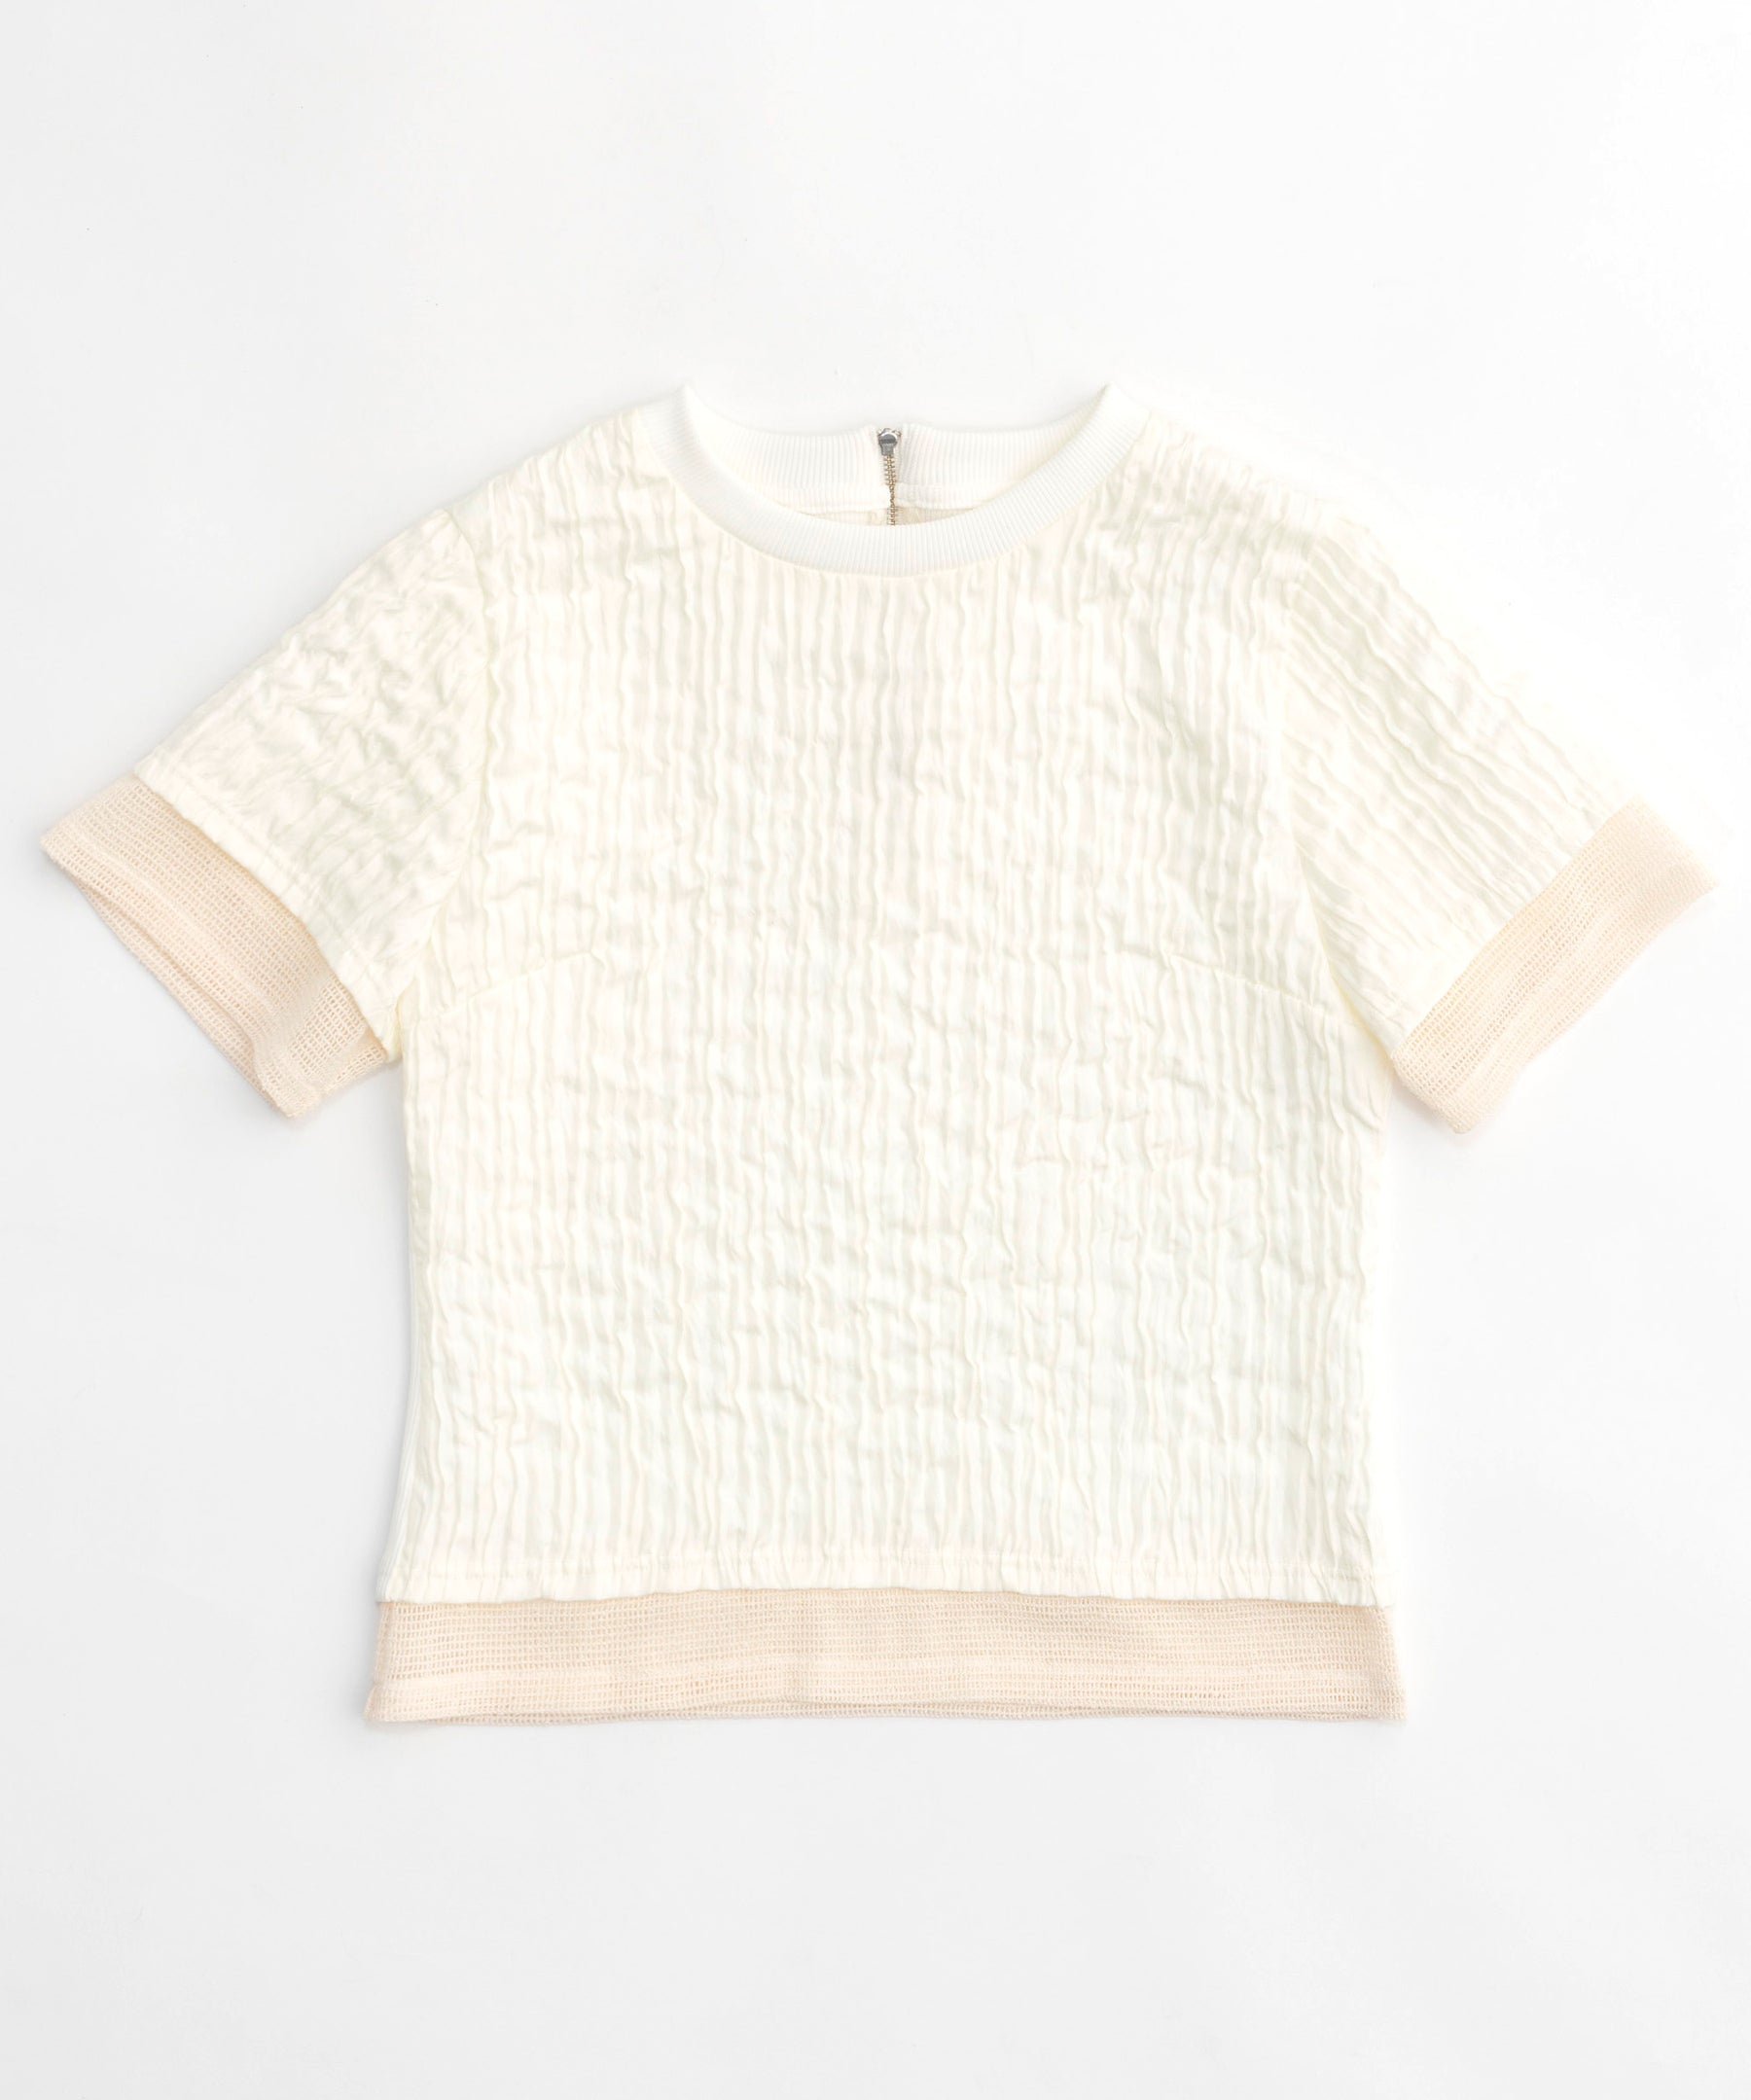 Floating JACQUARD COMPACT TOPS